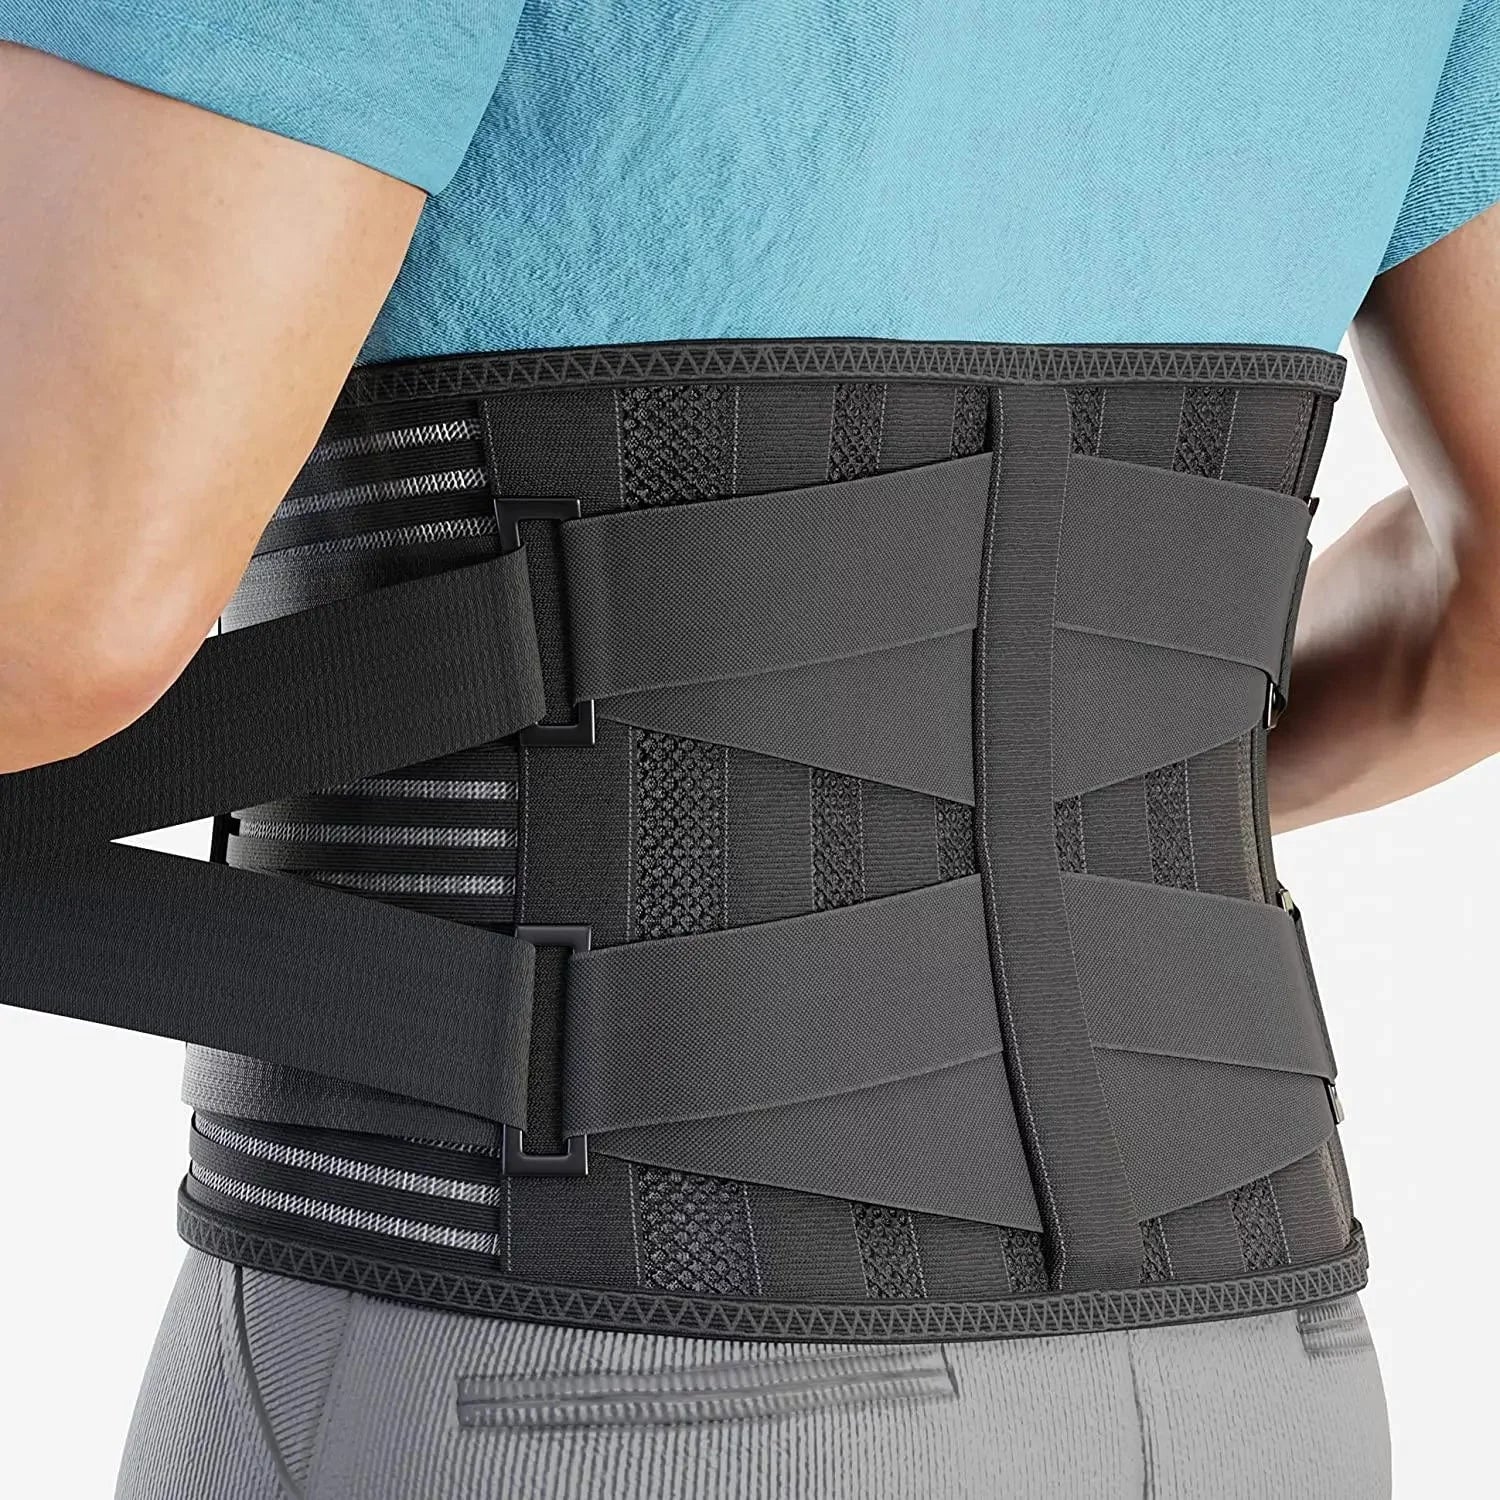 MODVEL Lower Back Brace with 6 Stays | Lower Back Pain Relief | Lumbar ...